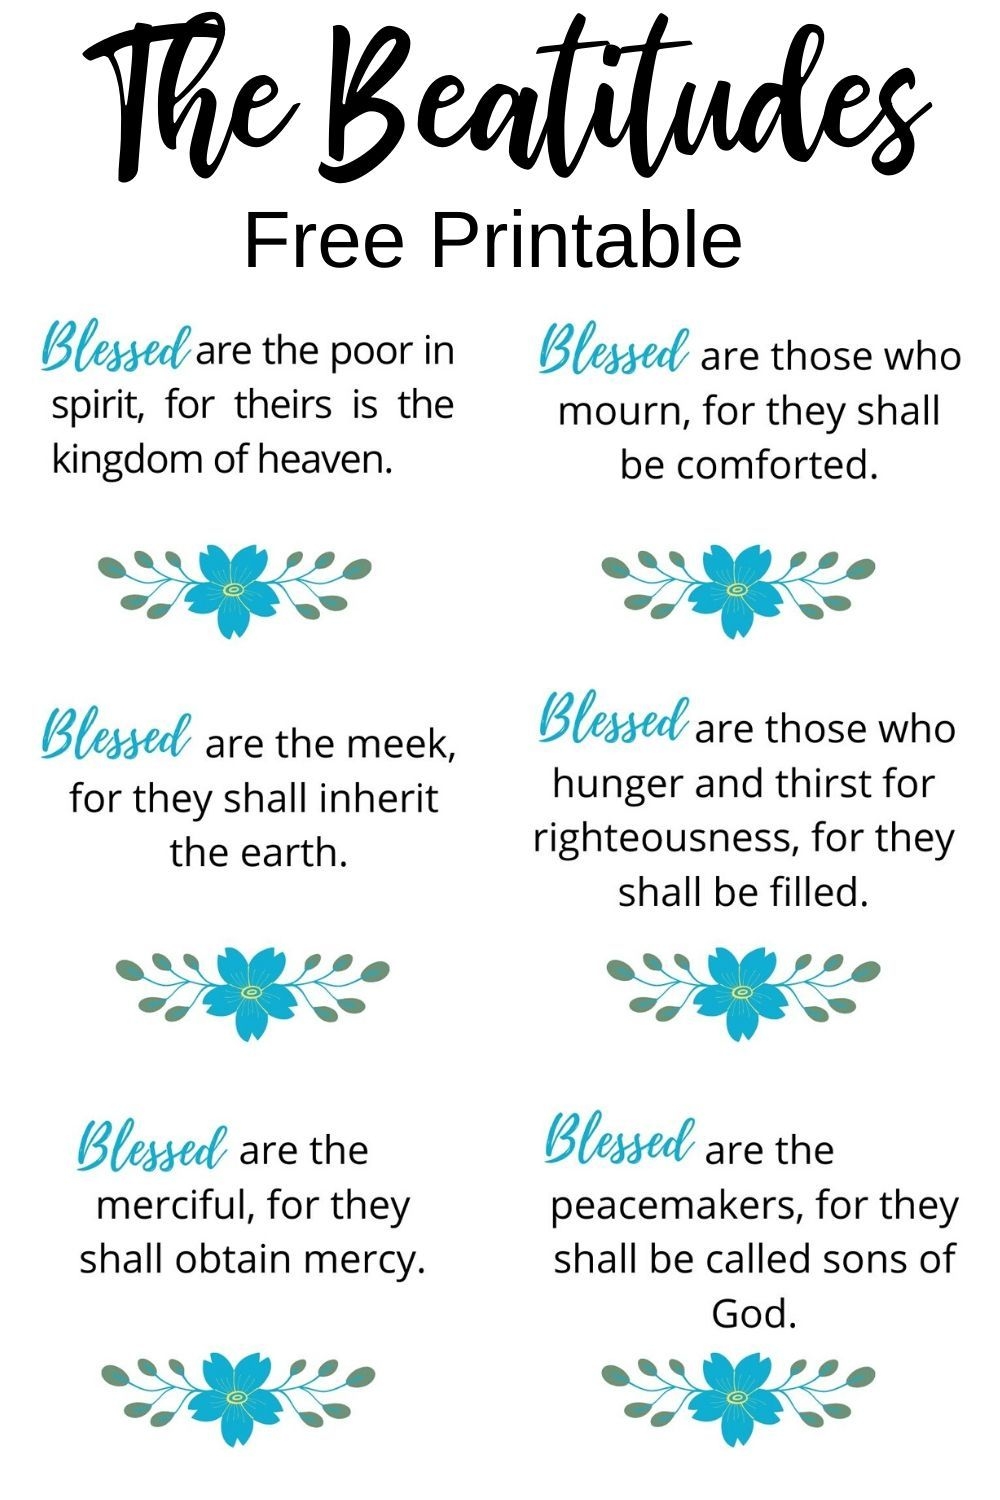 What Are The Beatitudes In The Bible Plus Free Printable Bible Quotes Beatitudes Scripture Writing Plans